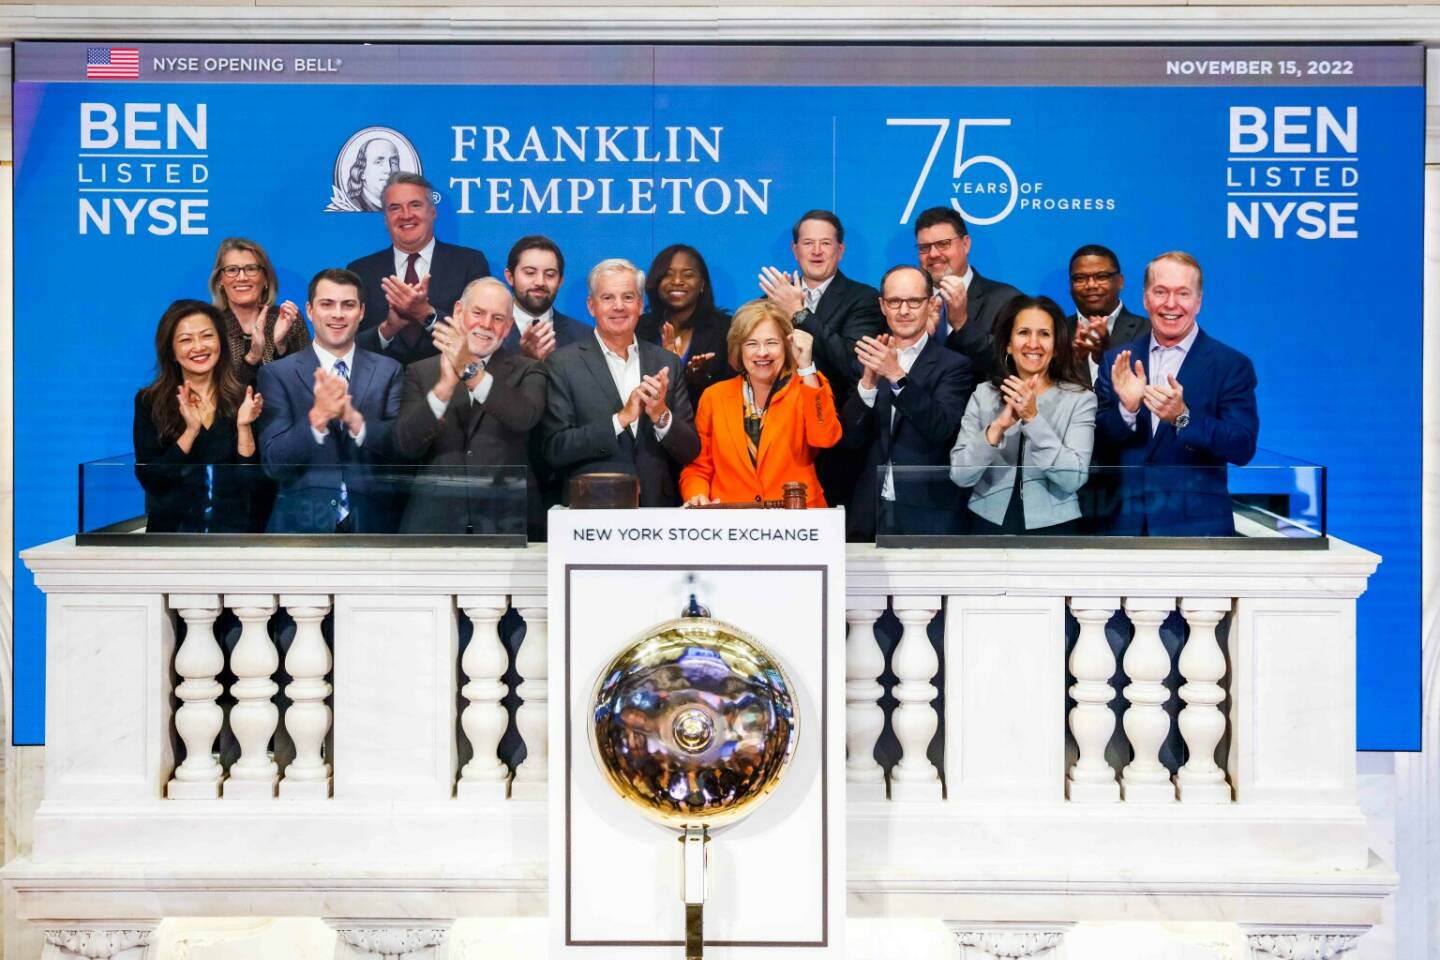 Franklin Templeton (NYSE: BEN) Rings The Opening Bell® - Franklin Templeton feiert sein 75-jähriges Bestehen mit Läuten der Glocke der New Yorker Börse. To honor the occasion, Jenny Johnson, President and CEO, joined by NYSE President Lynn Martin, rings The Opening Bell® - Credit: Franklin Templeton

Photo Credit: NYSE